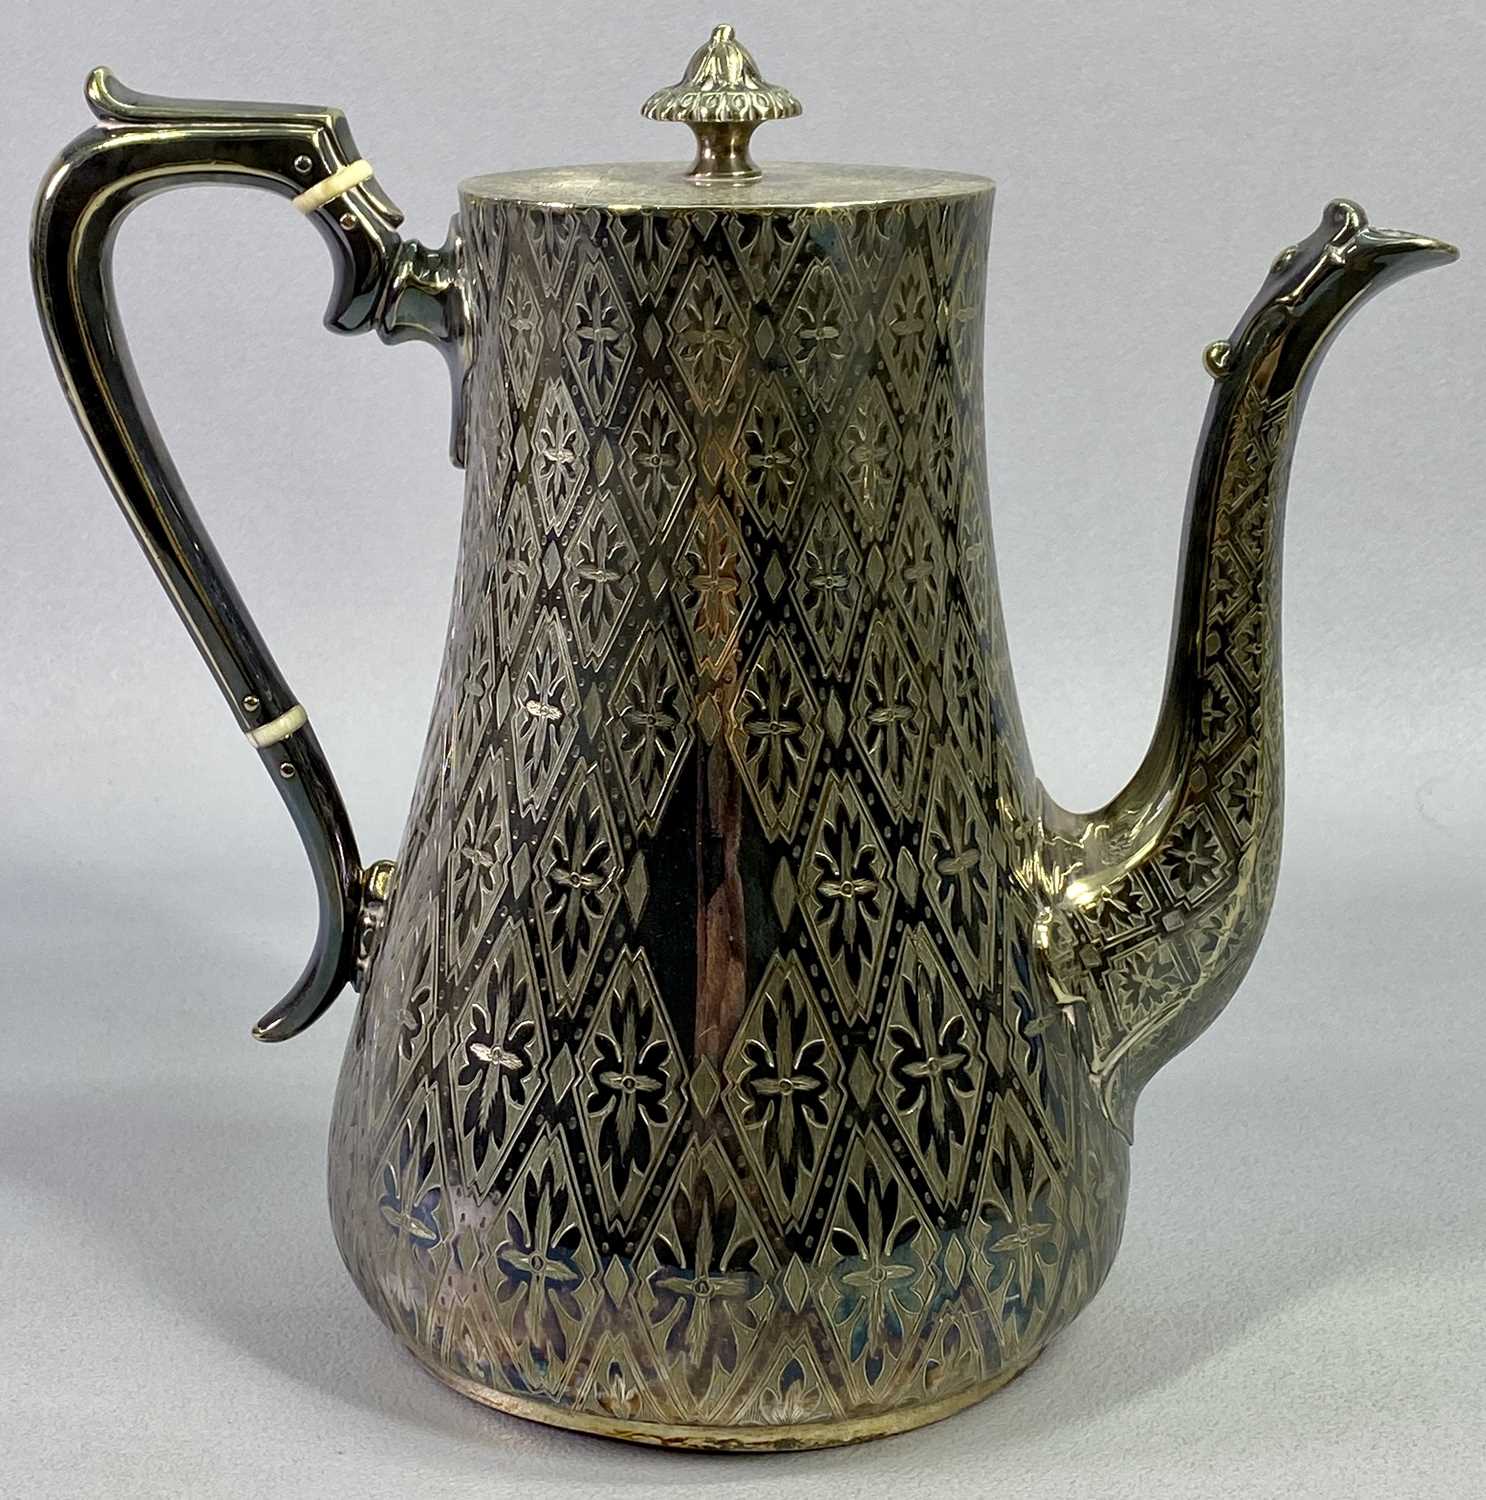 BURMESE STYLE WHITE METAL TEAPOT - repousse chased design with animals hunting, scrolls and flowers, - Image 5 of 5